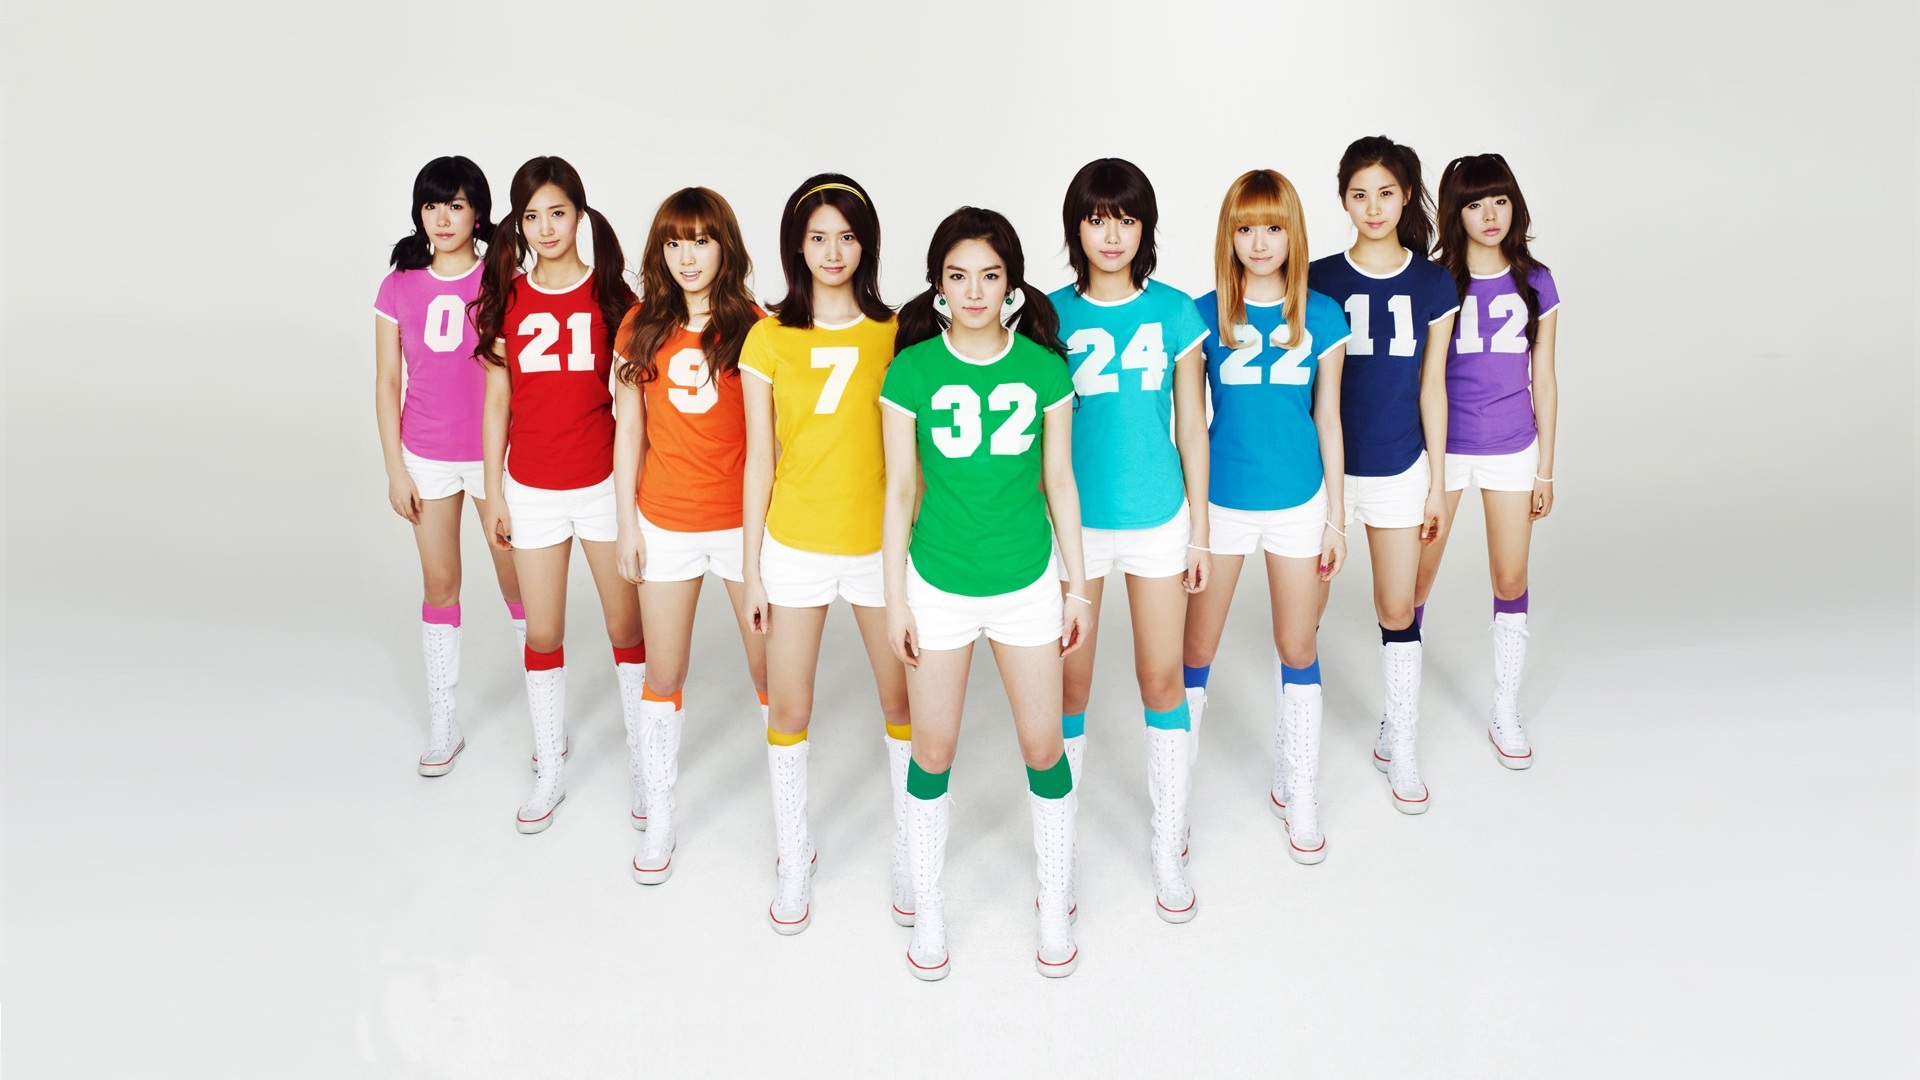 People 1920x1080 K-pop Girls' Generation Asian Korean women colorful SNSD brunette group of women women white shoes shorts T-shirt numbers frontal view high angle spectrum